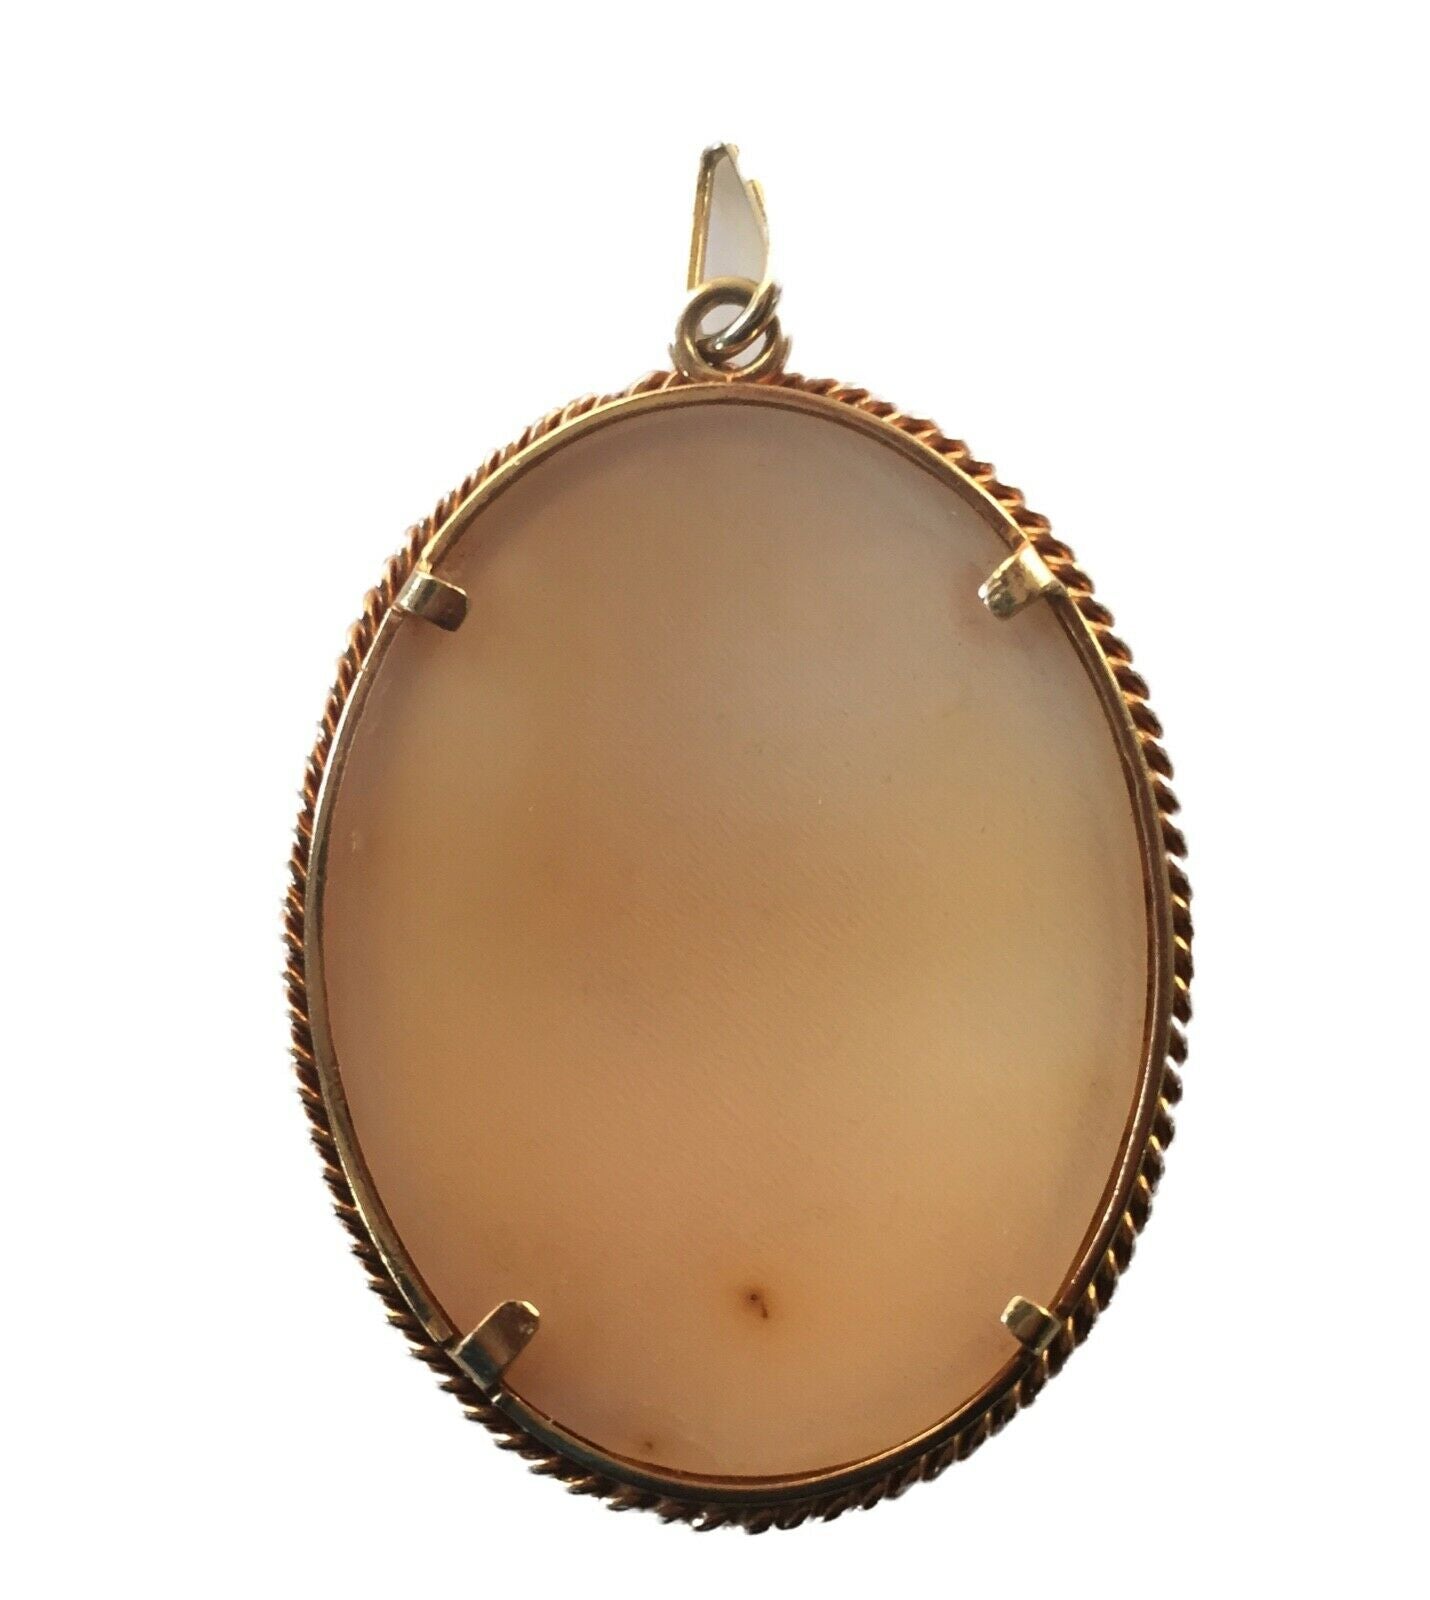 #2017 19th Century 18K Solid Gold Shell Cameo Brooch Pendant